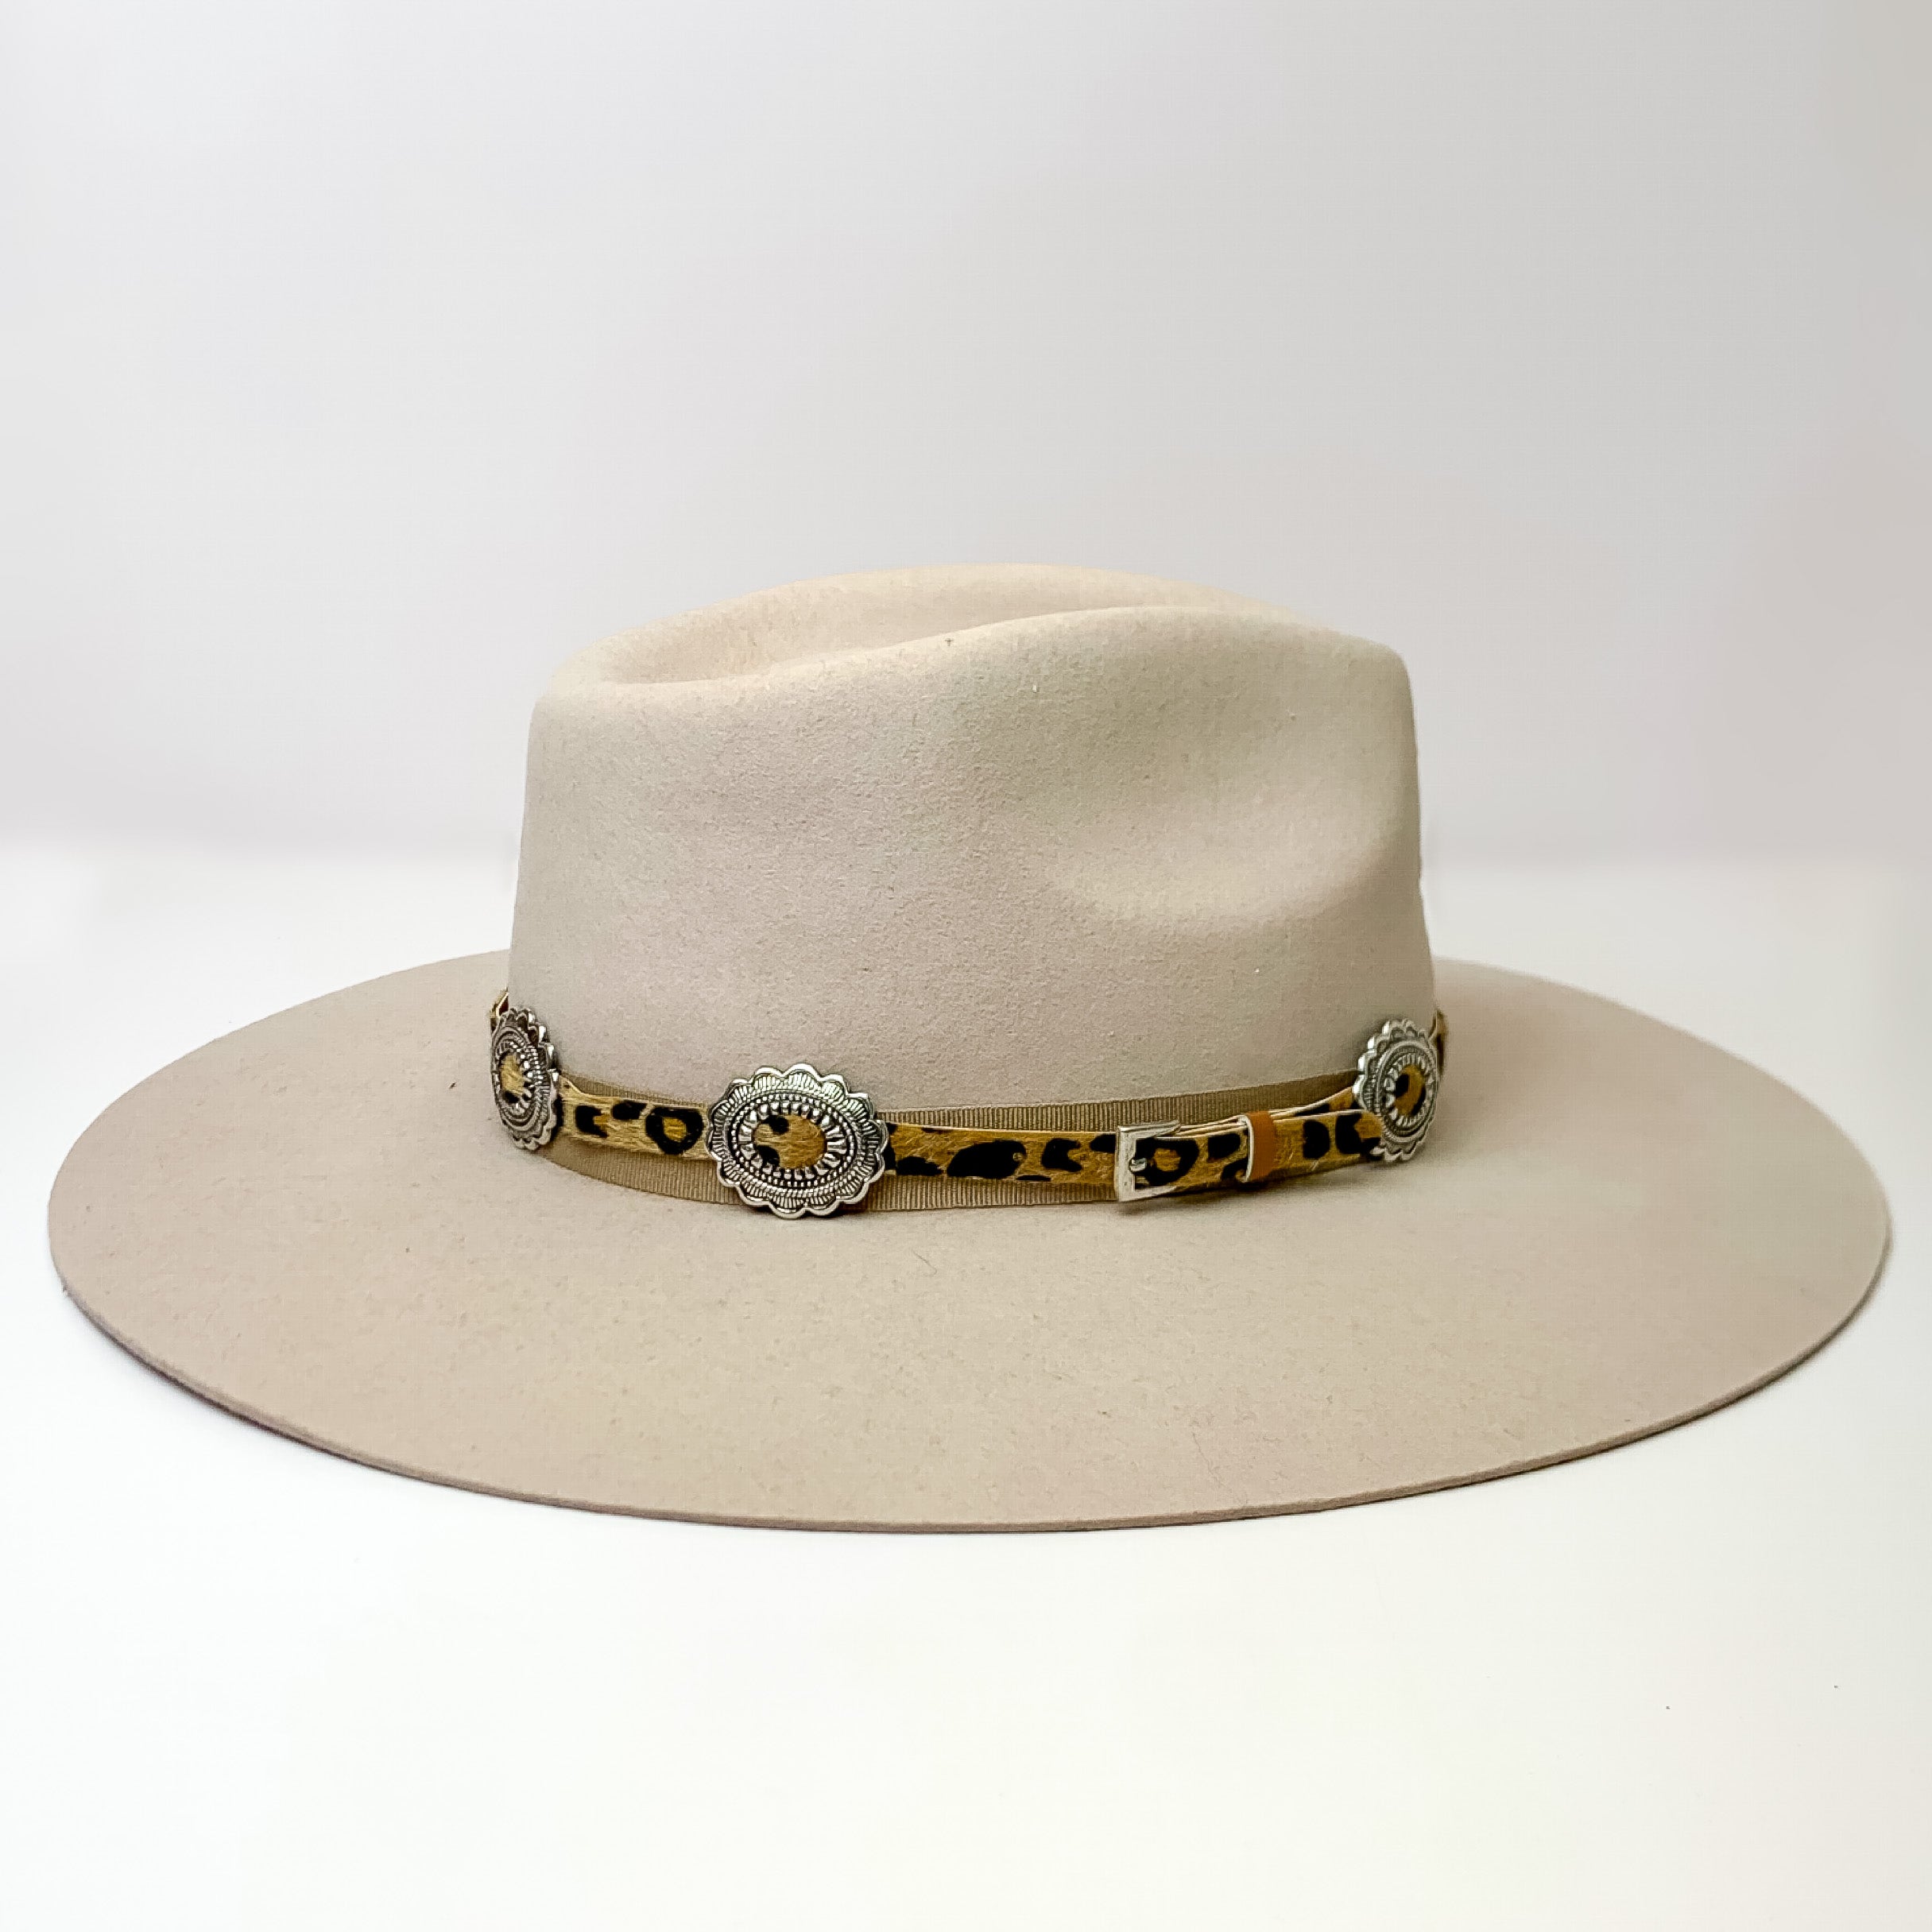 Leopard Print Hat Band With Conchos in Silver Tone - Giddy Up Glamour Boutique